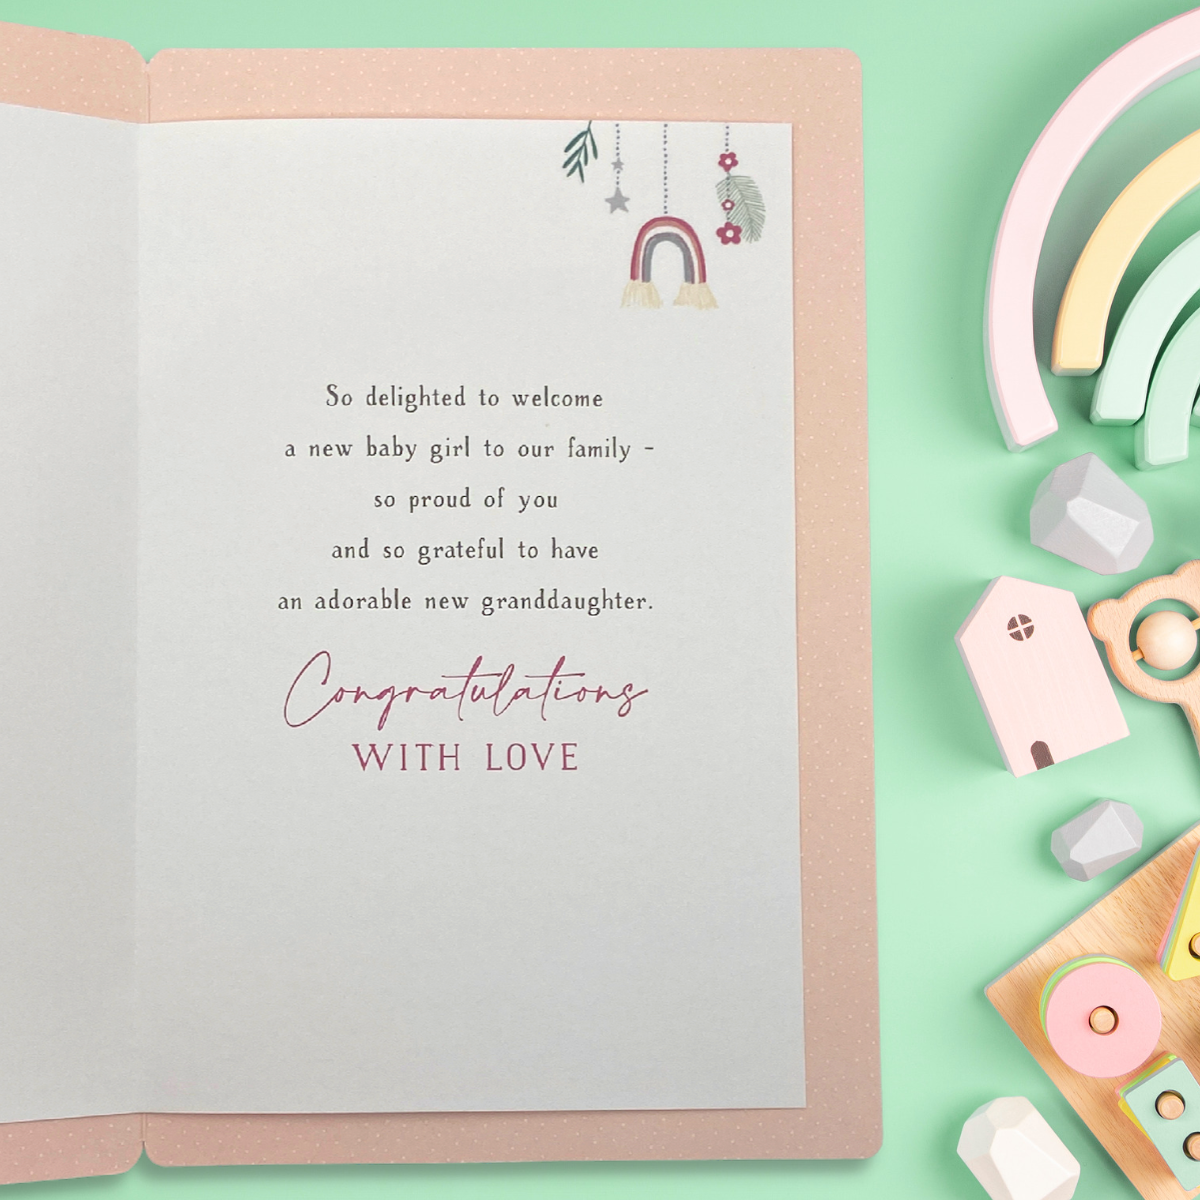 Inside image with pink border and white insert, coloured images and verse